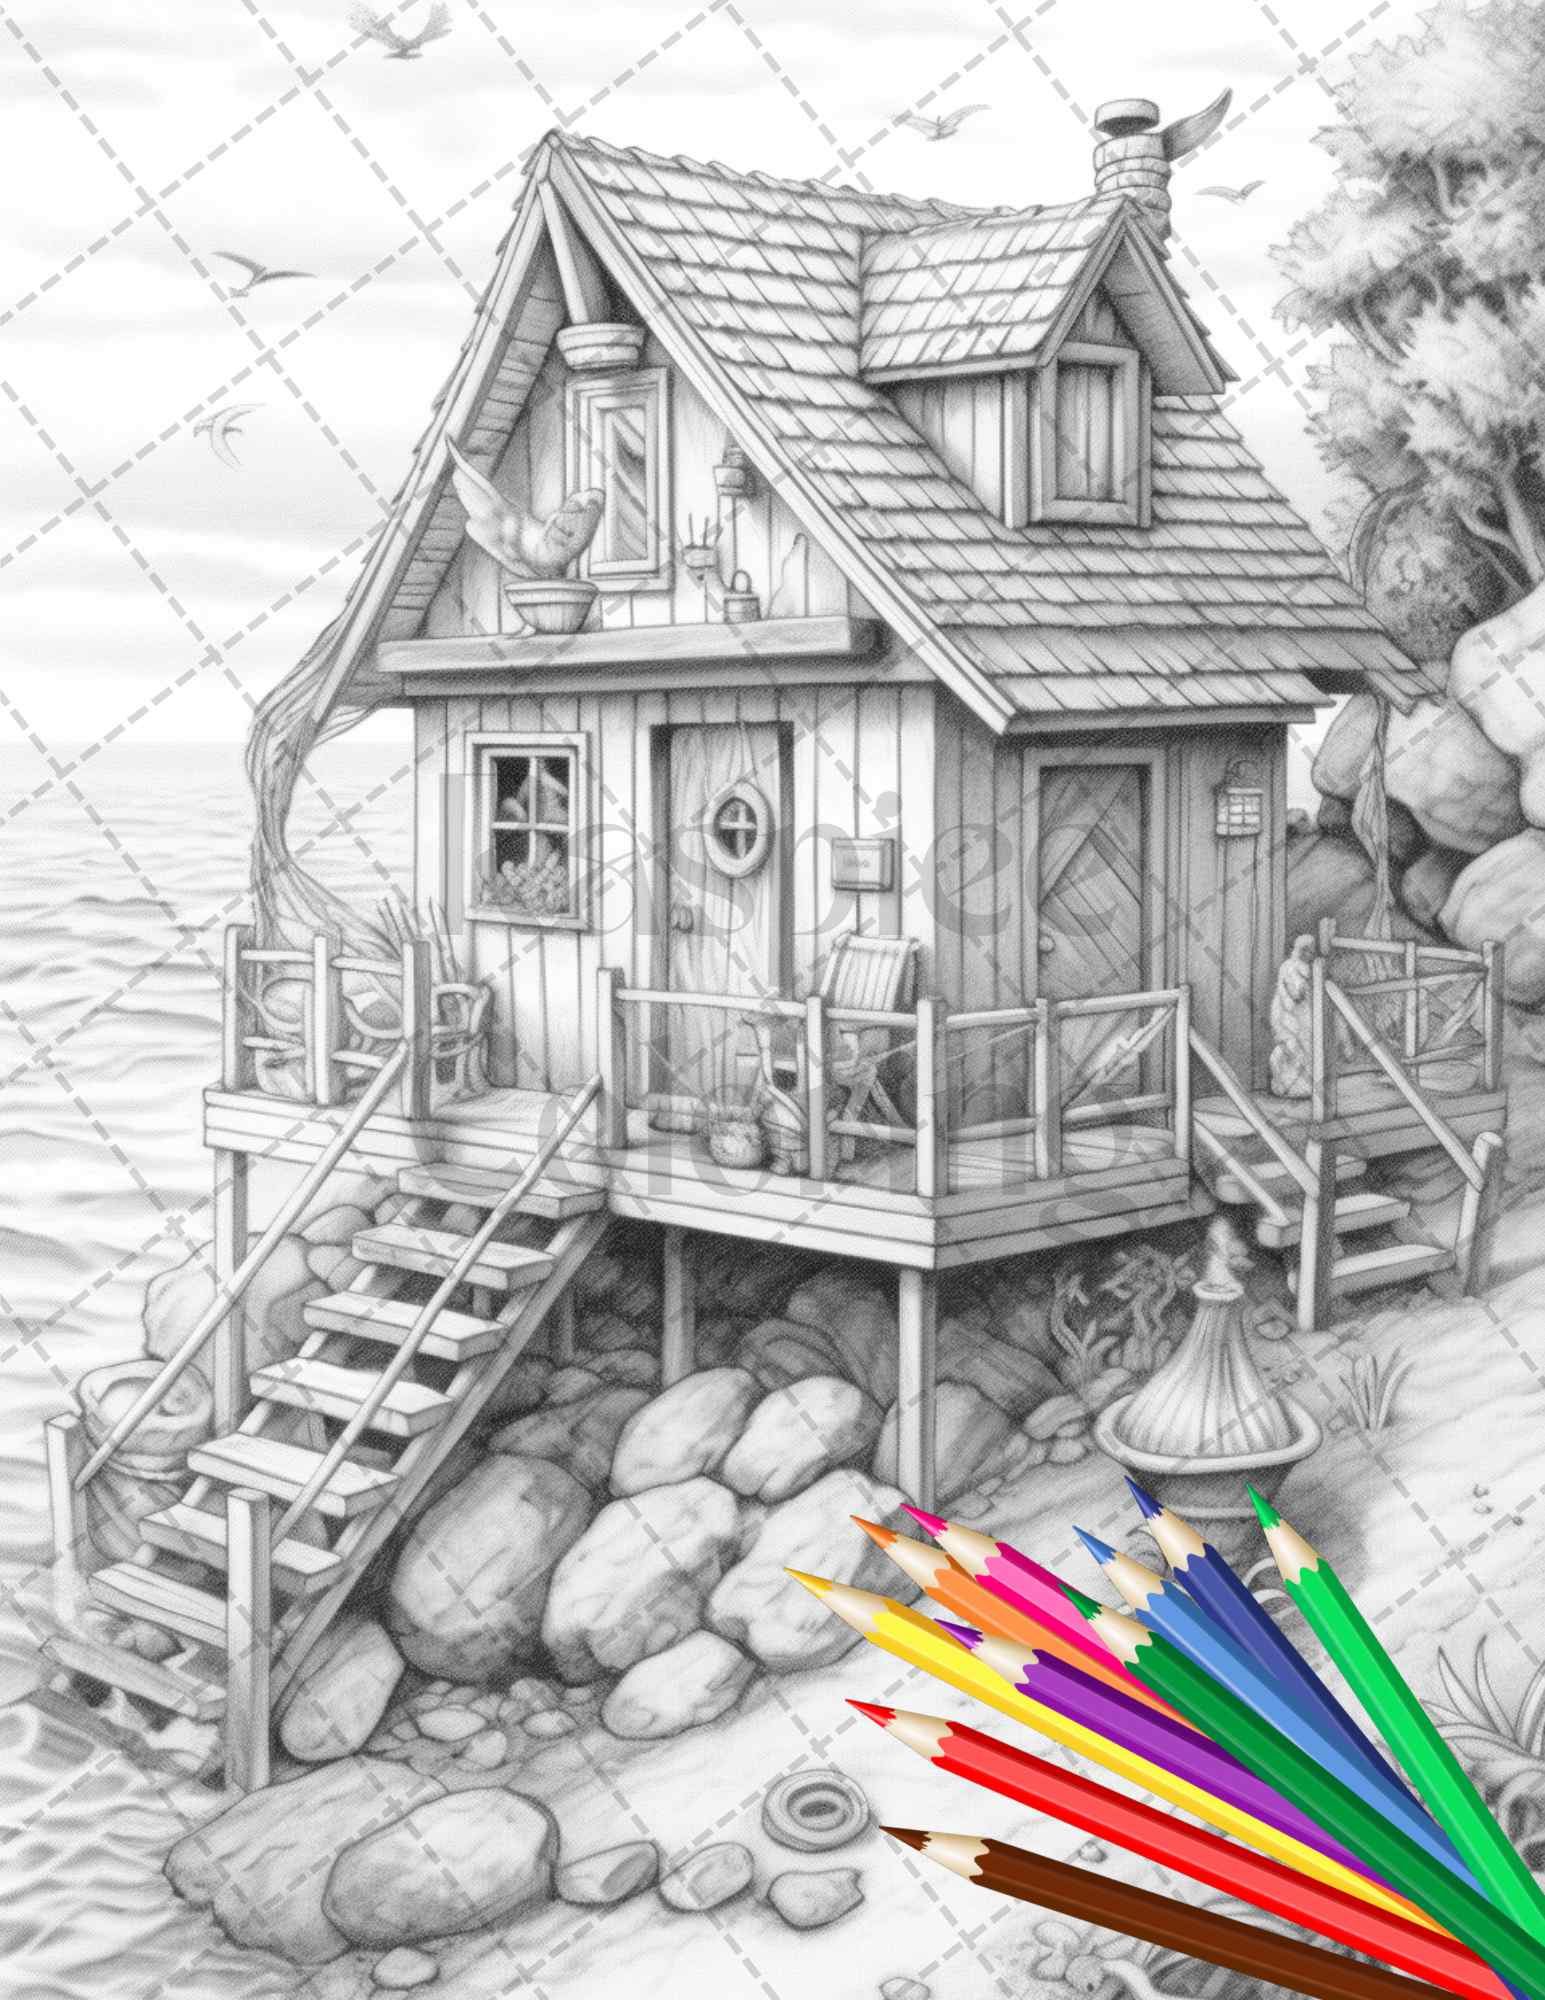 grayscale coloring page with wooden beach house, printable adult coloring page - beach houses